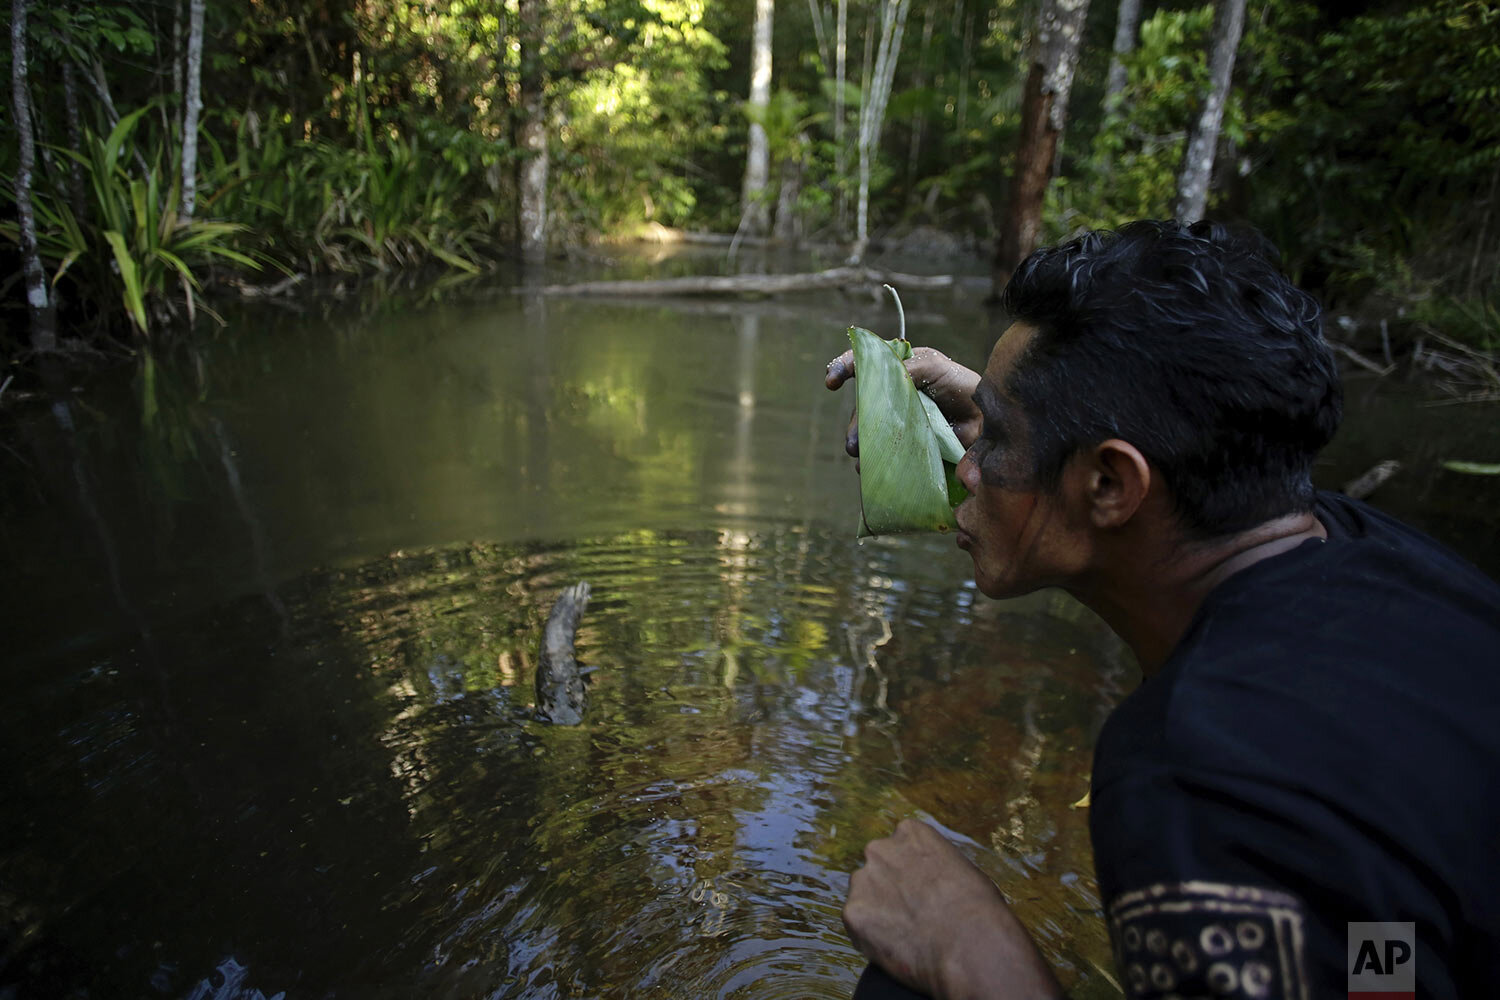  Regis Tufo Moreira Tembem, a Tenetehara Indigenous man from the Ka'Azar, or Forest Owners, uses a leaf as a cup to drink water from a stream as his group patrols their lands on the Alto Rio Guama Reserve, near Paragominas, in the northern Brazilian 